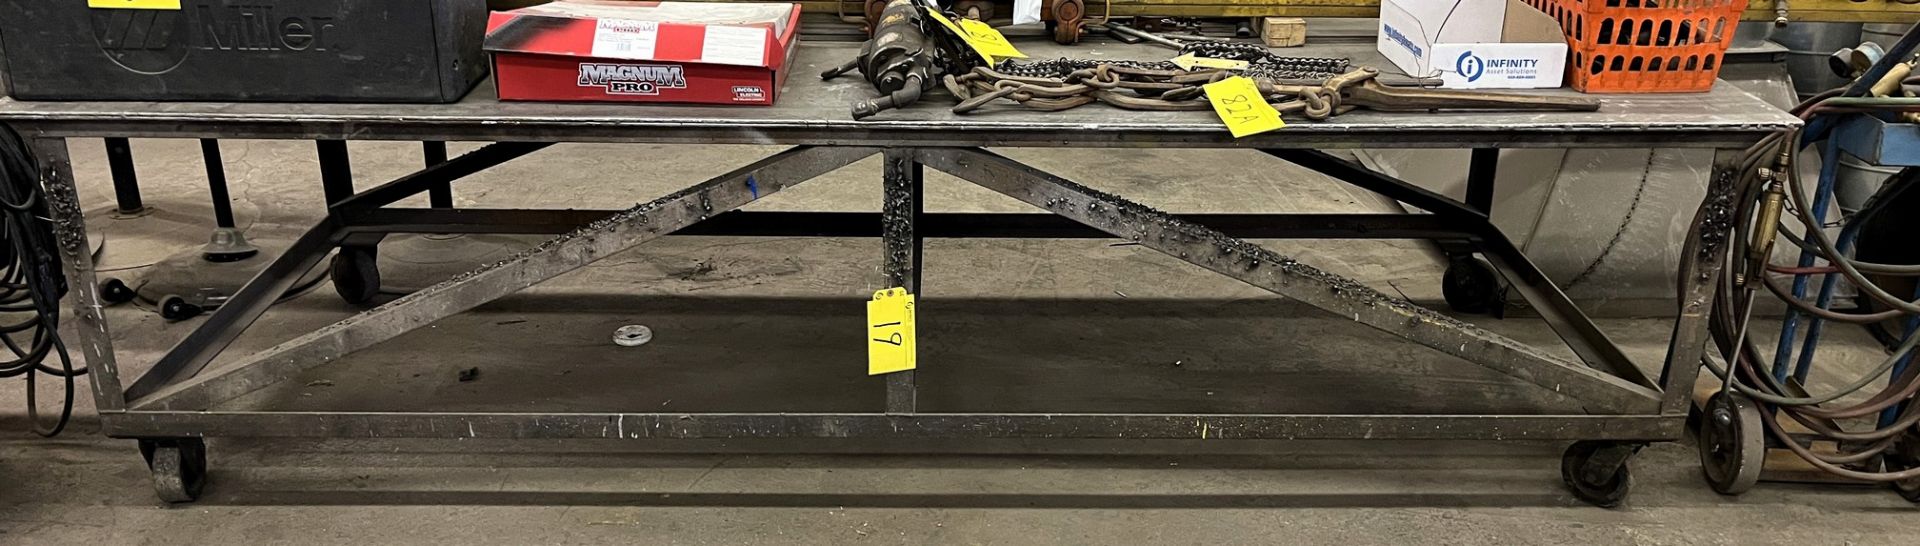 PORTABLE STEEL WELDING TABLE, APPROX. 10'L X 4'W X 1/2" PLATE TOP (NO CONTENTS)